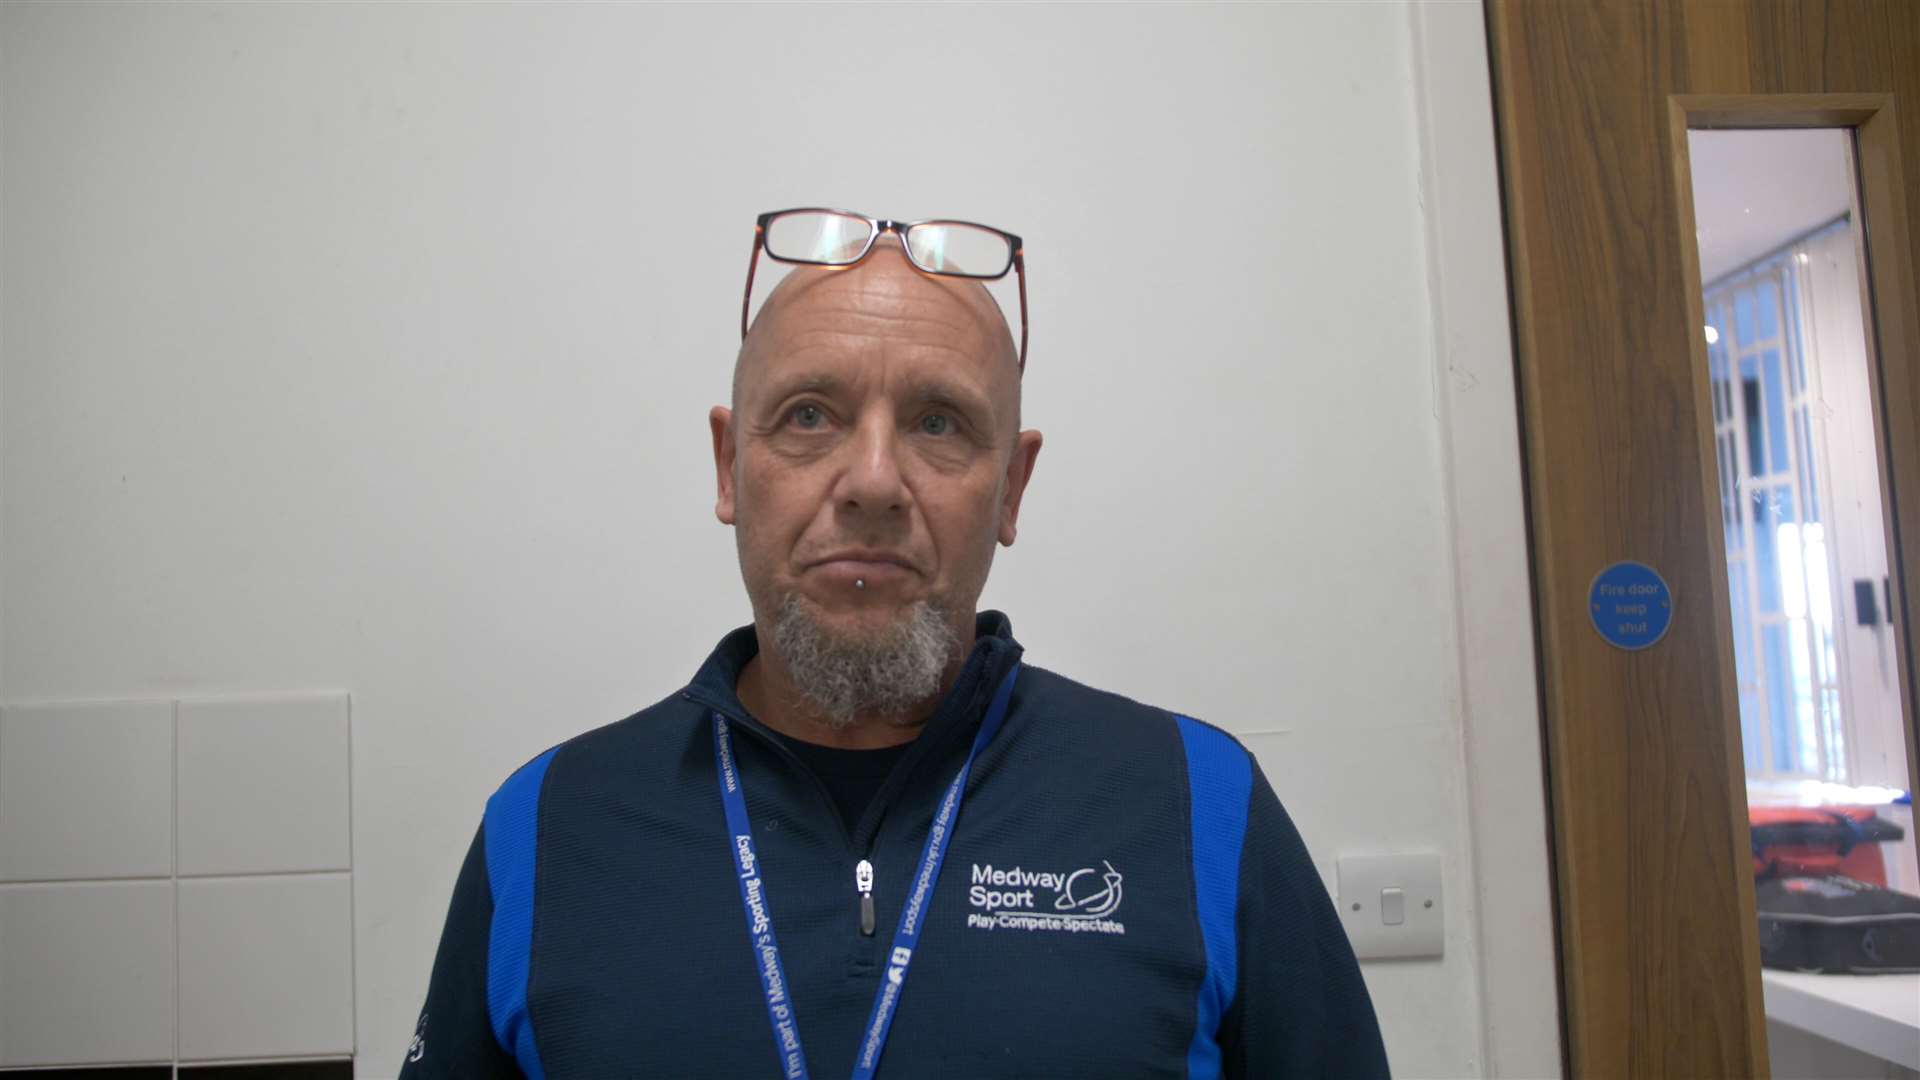 Simon Puttock, a instructor at Medway Sport